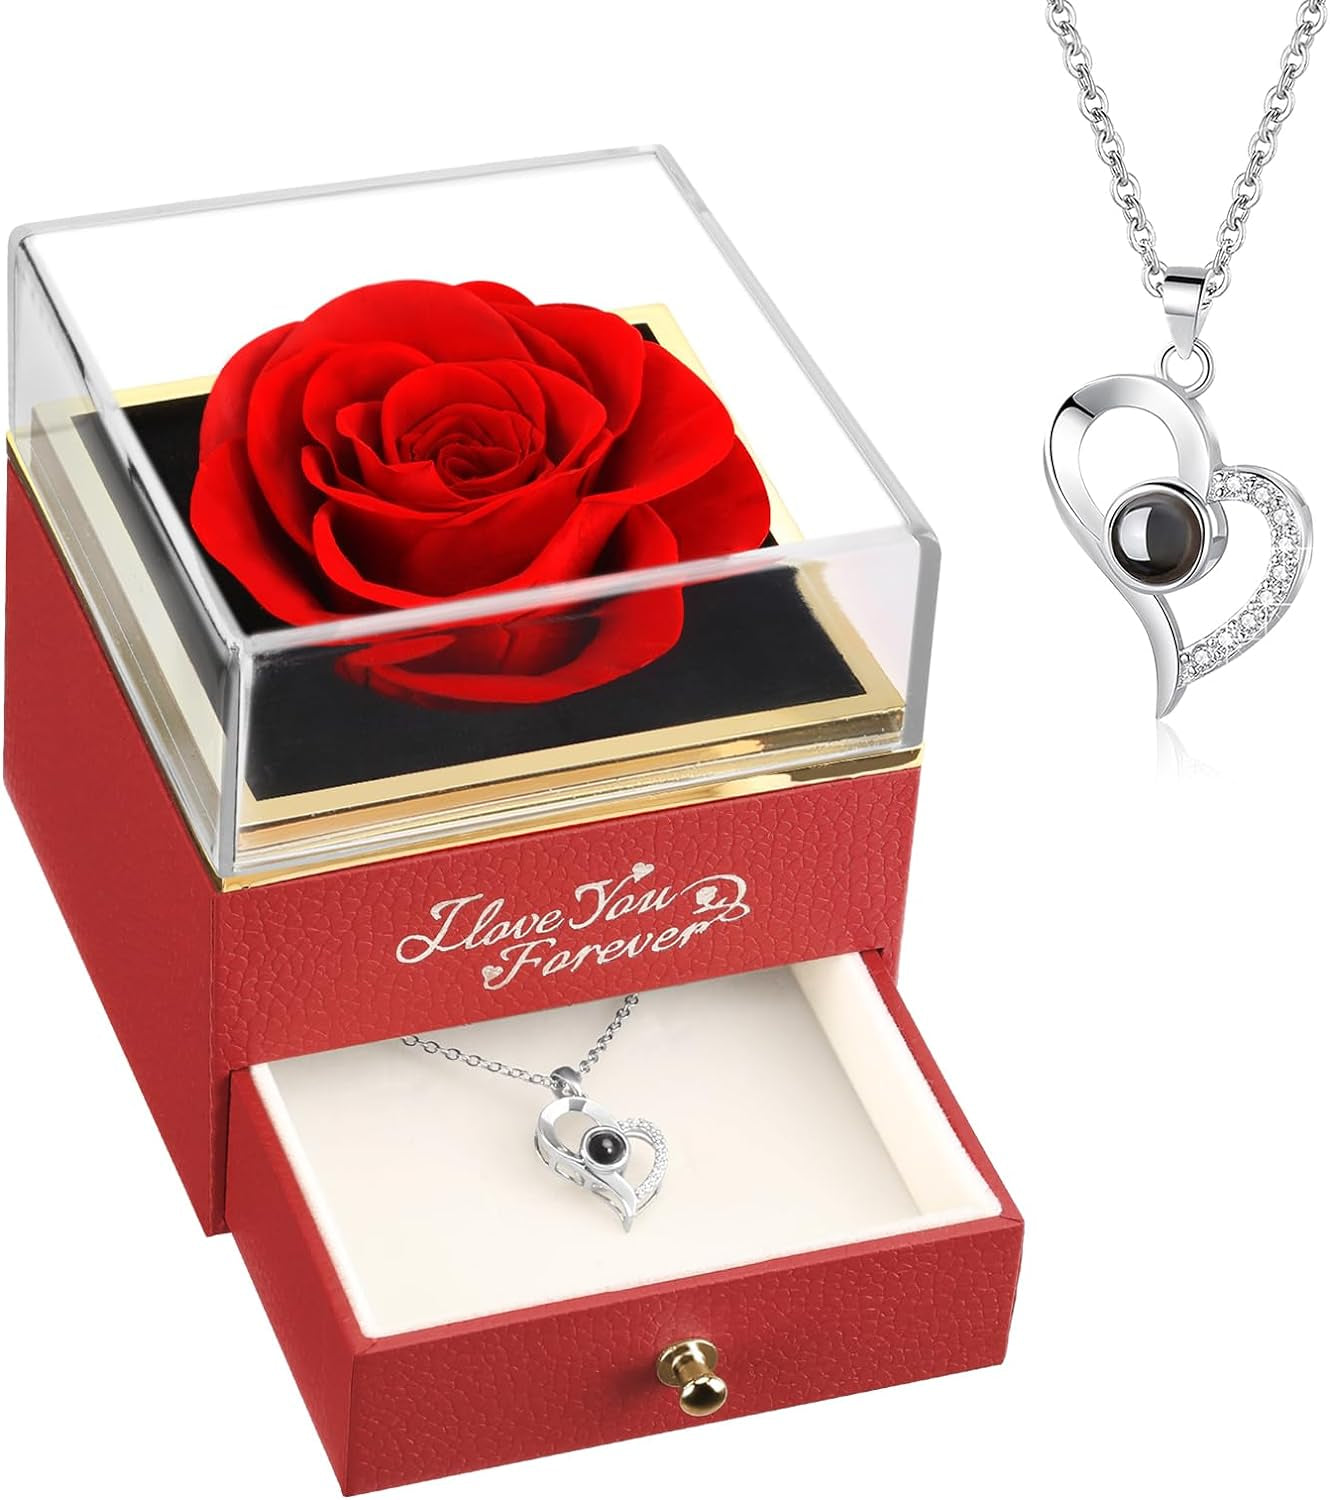 Mothers Day Gifts, Preserved Real Rose with I Love You Necklace, Forever Flowers Rose Gifts for Women, Mom, Wife and Girlfriend, Anniversary Birthday Gifts for Women